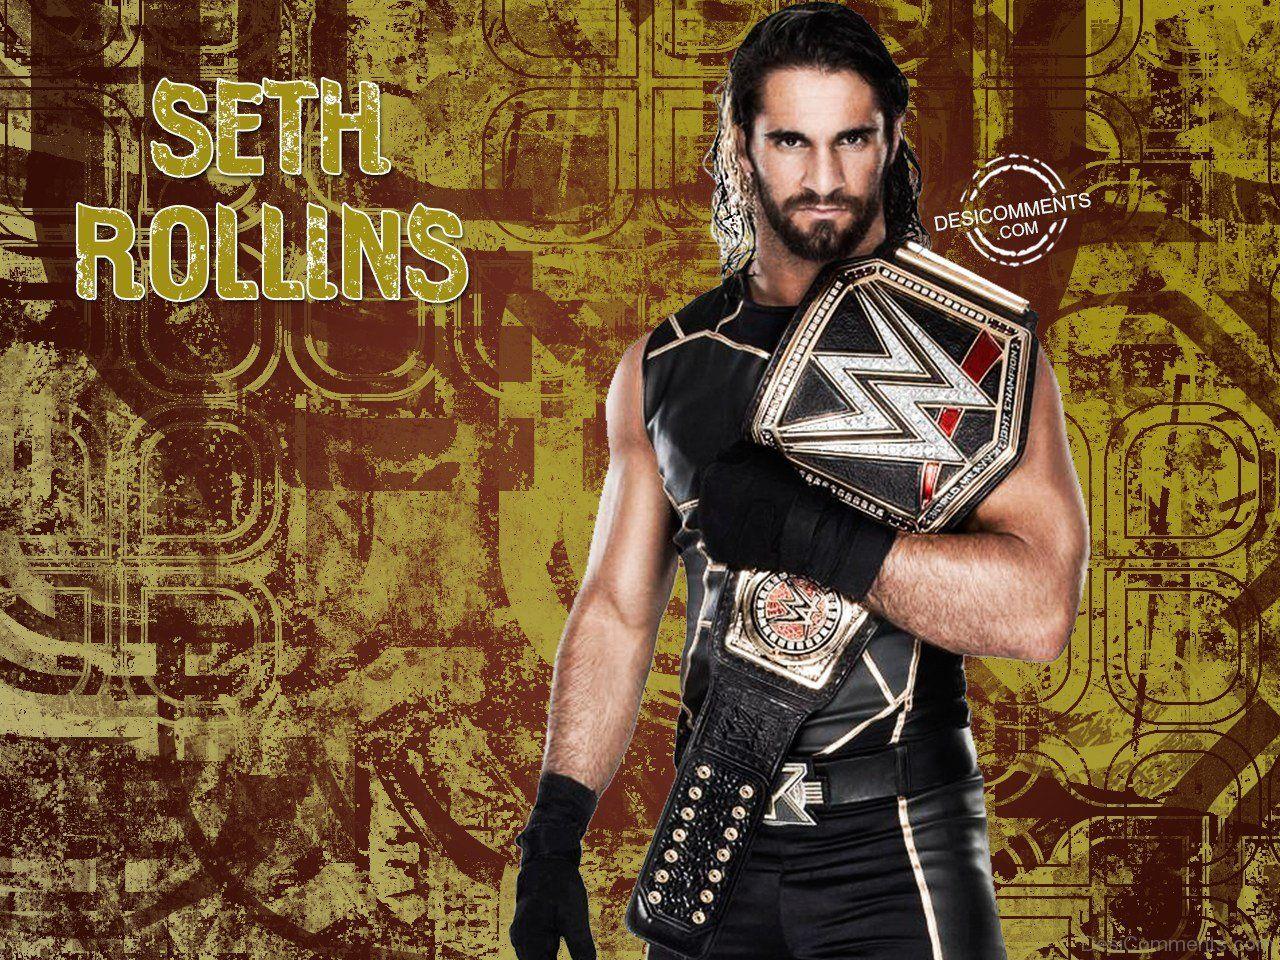 WWE Seth Rollin Anime Wallpapers - Wallpaper Cave
